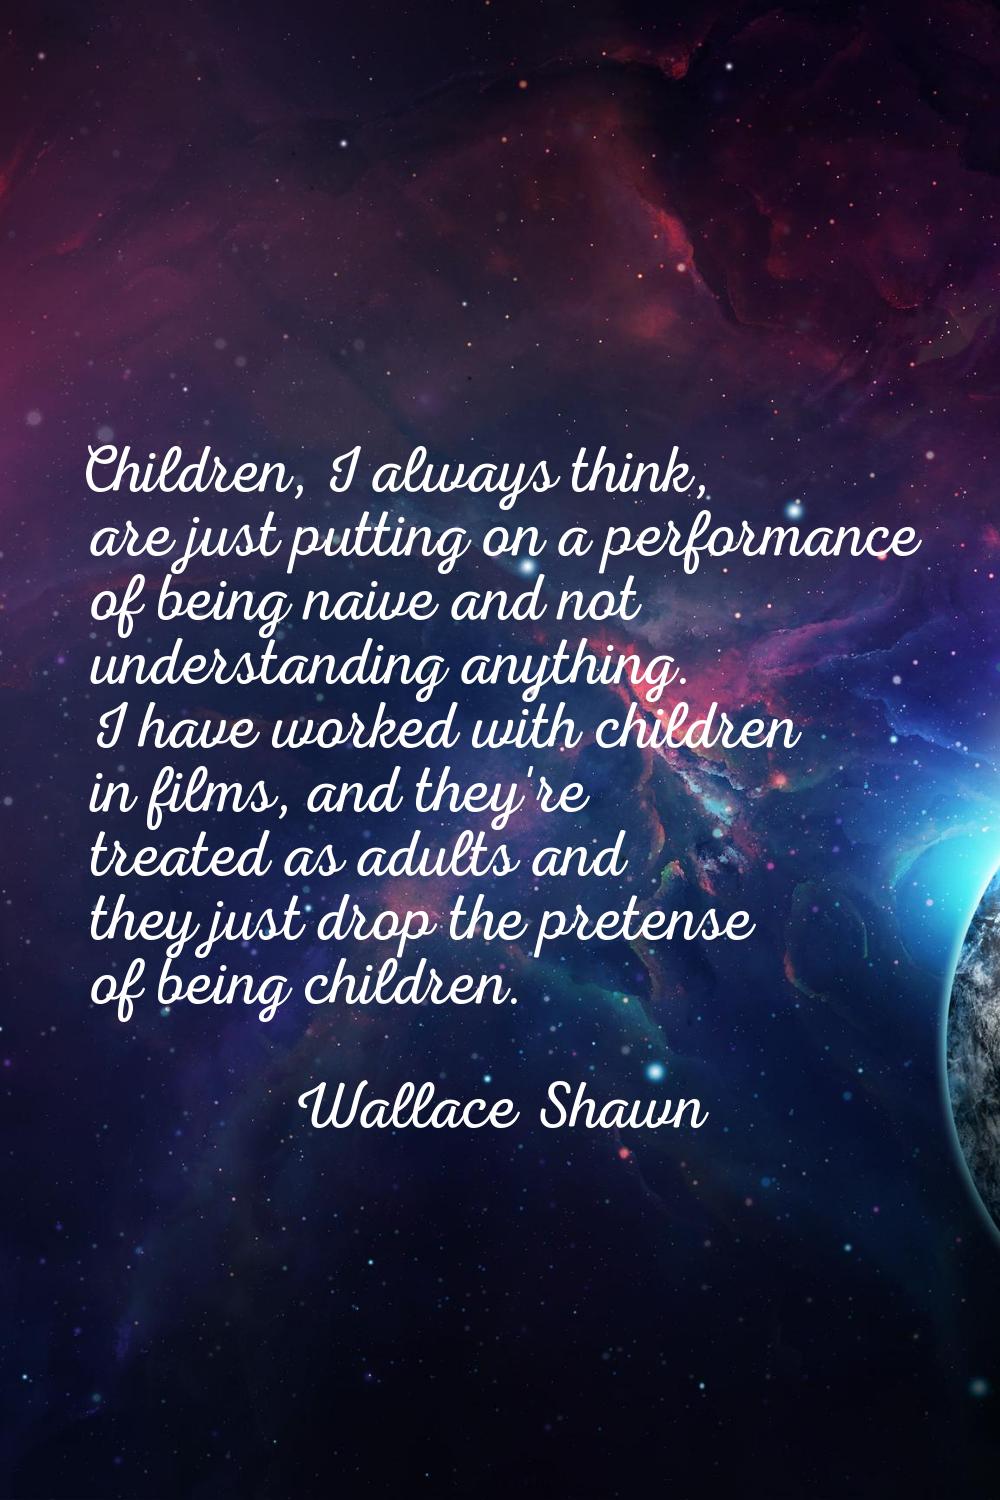 Children, I always think, are just putting on a performance of being naive and not understanding an